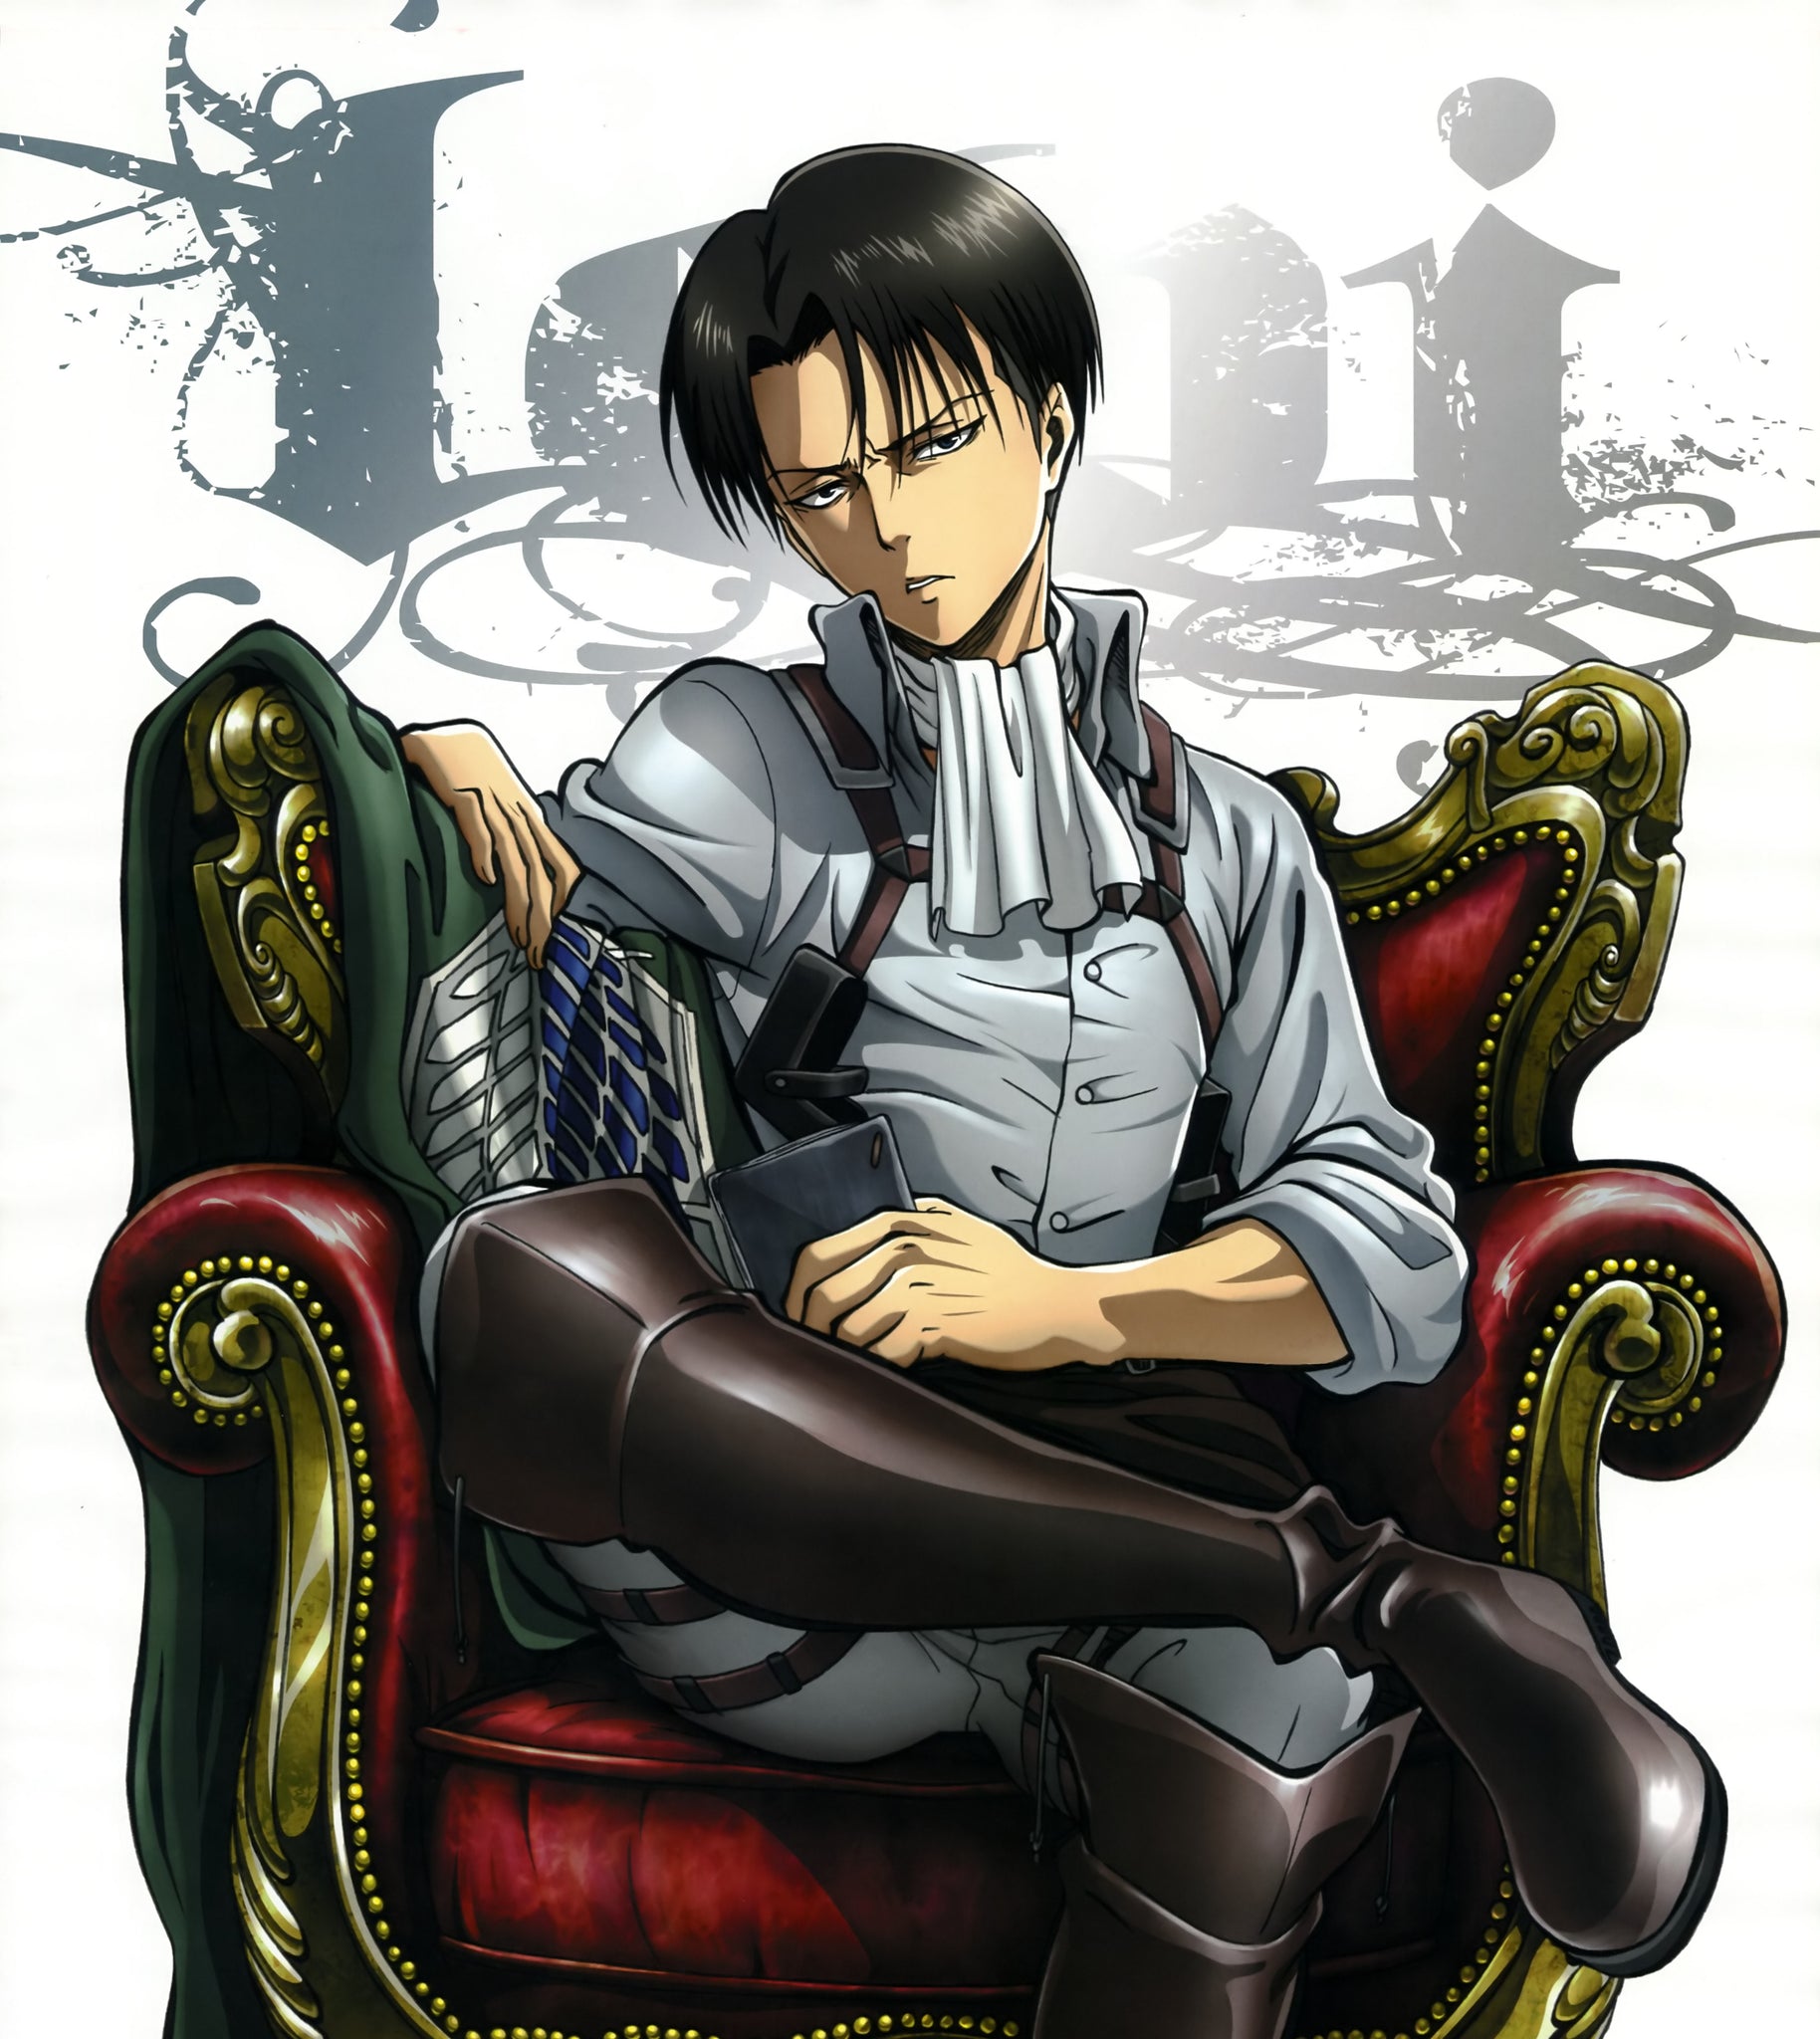 Levi Ackerman Is Ranked the Most Popular Character in Japan